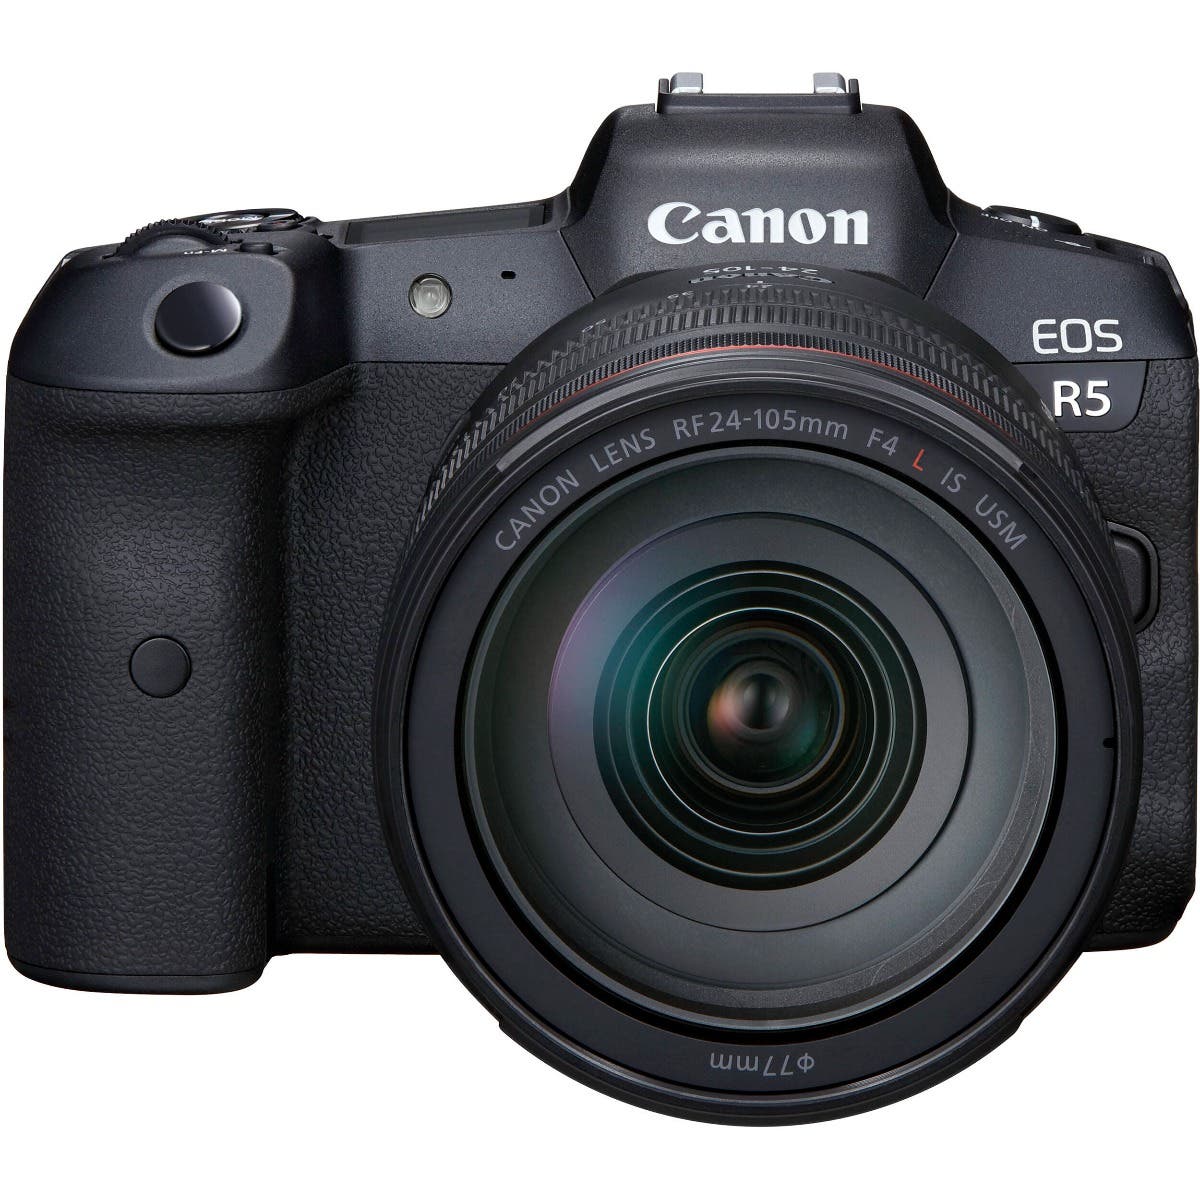 Canon EOS R5 Mirrorless Camera Body with RF 24-105m m f/4L IS USM Lens